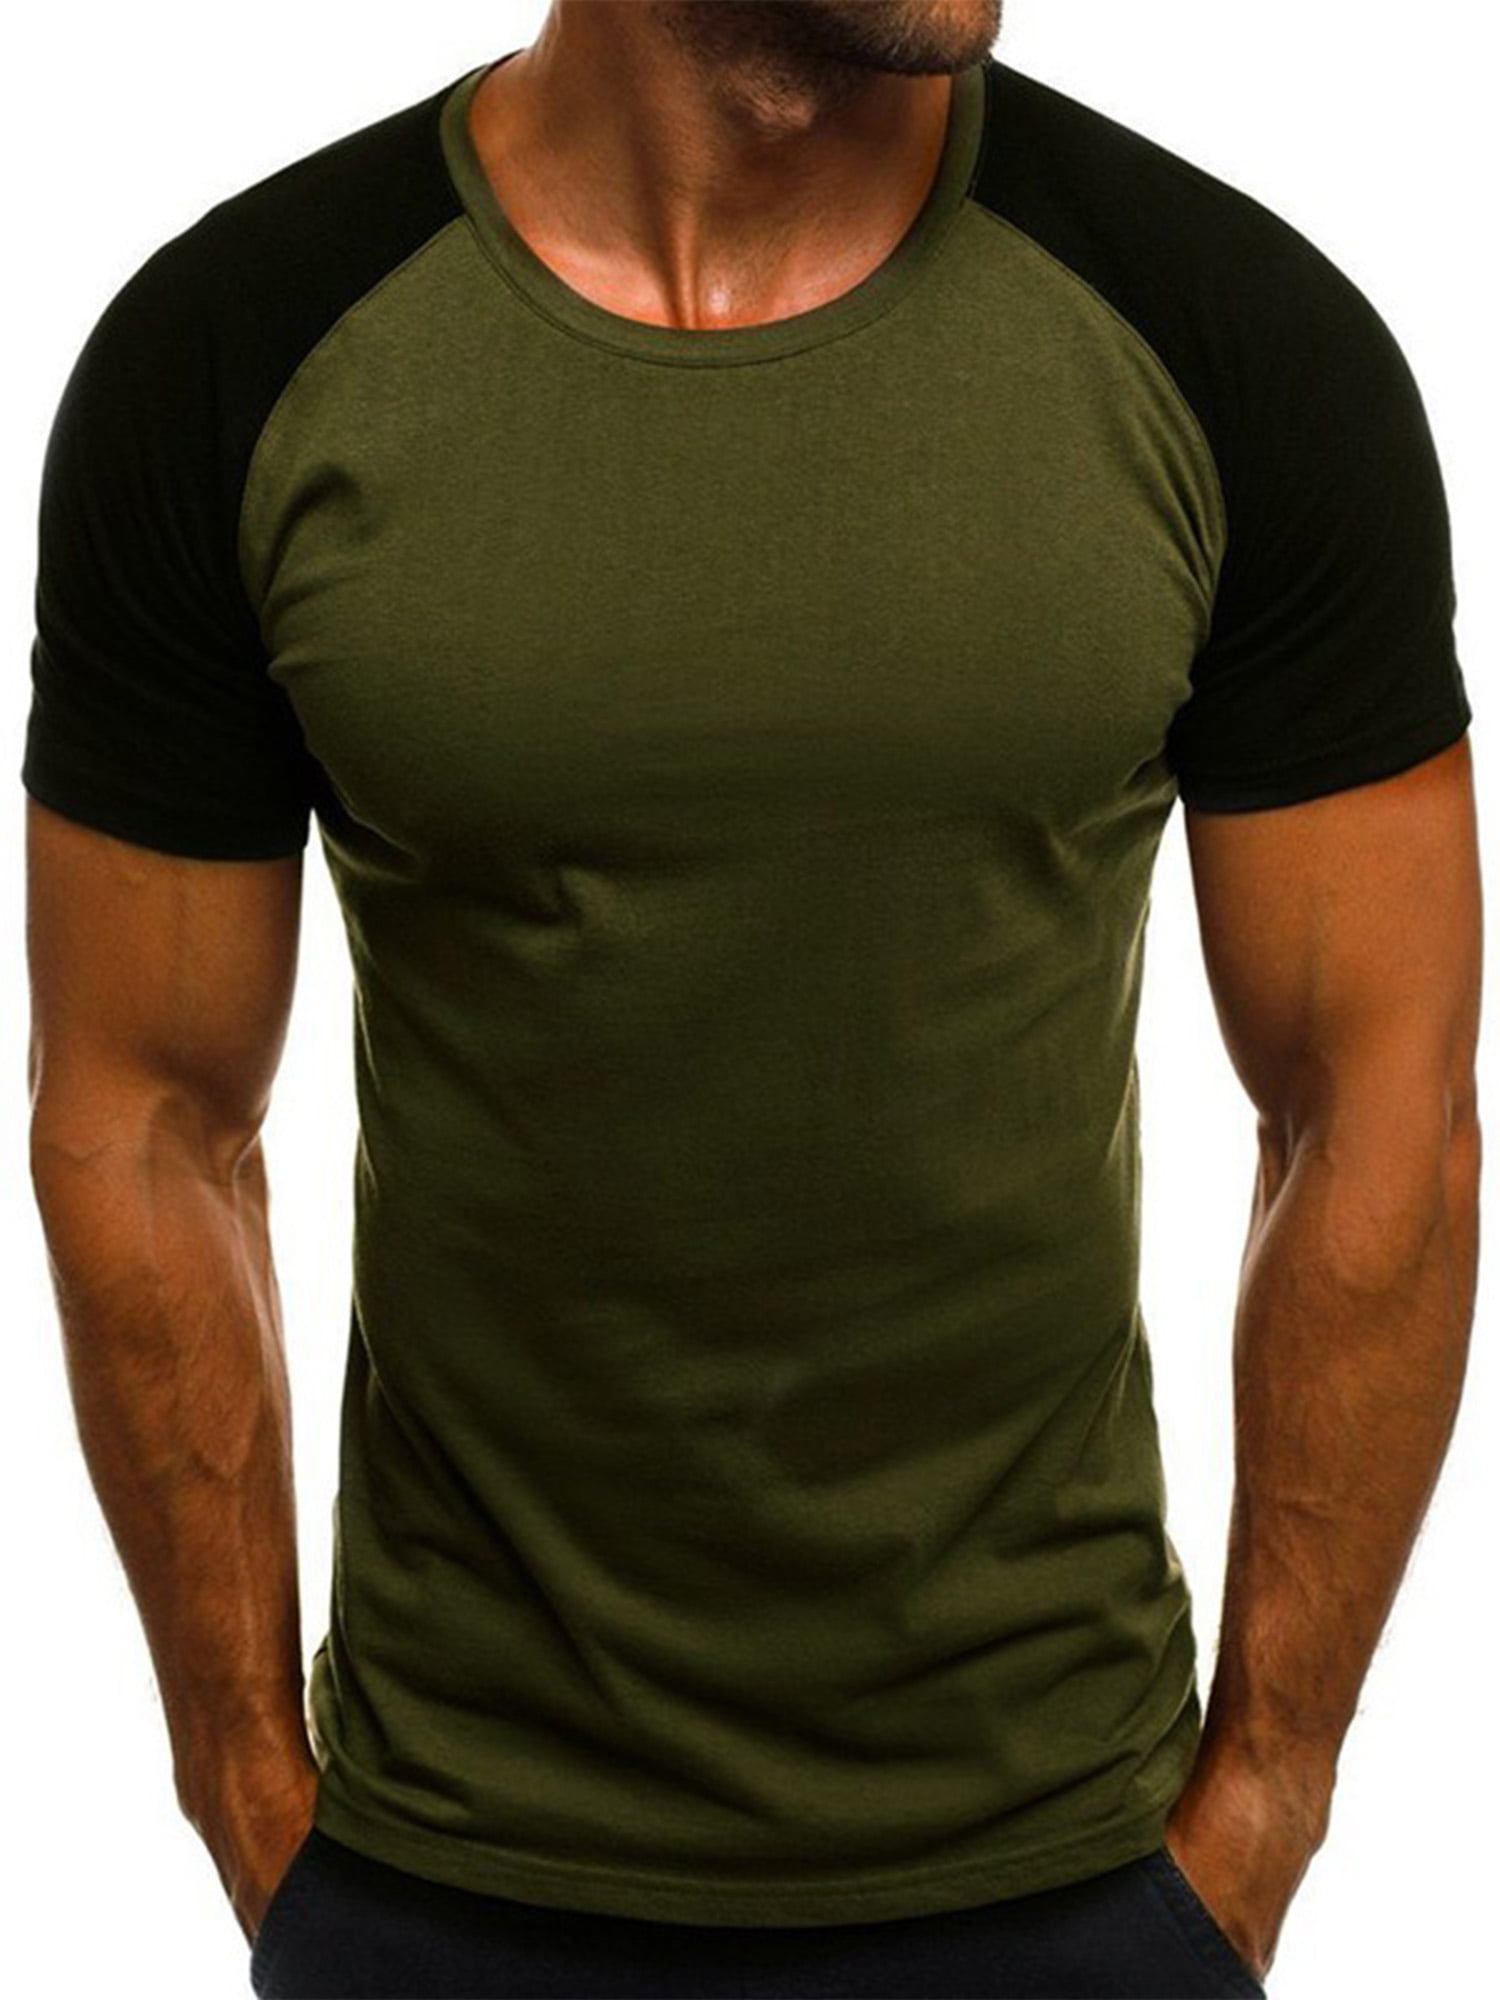 Men's Slim Fit T Shirt Muscle Top Casual Crew Neck Short Sleeve Blouse Tops Tee